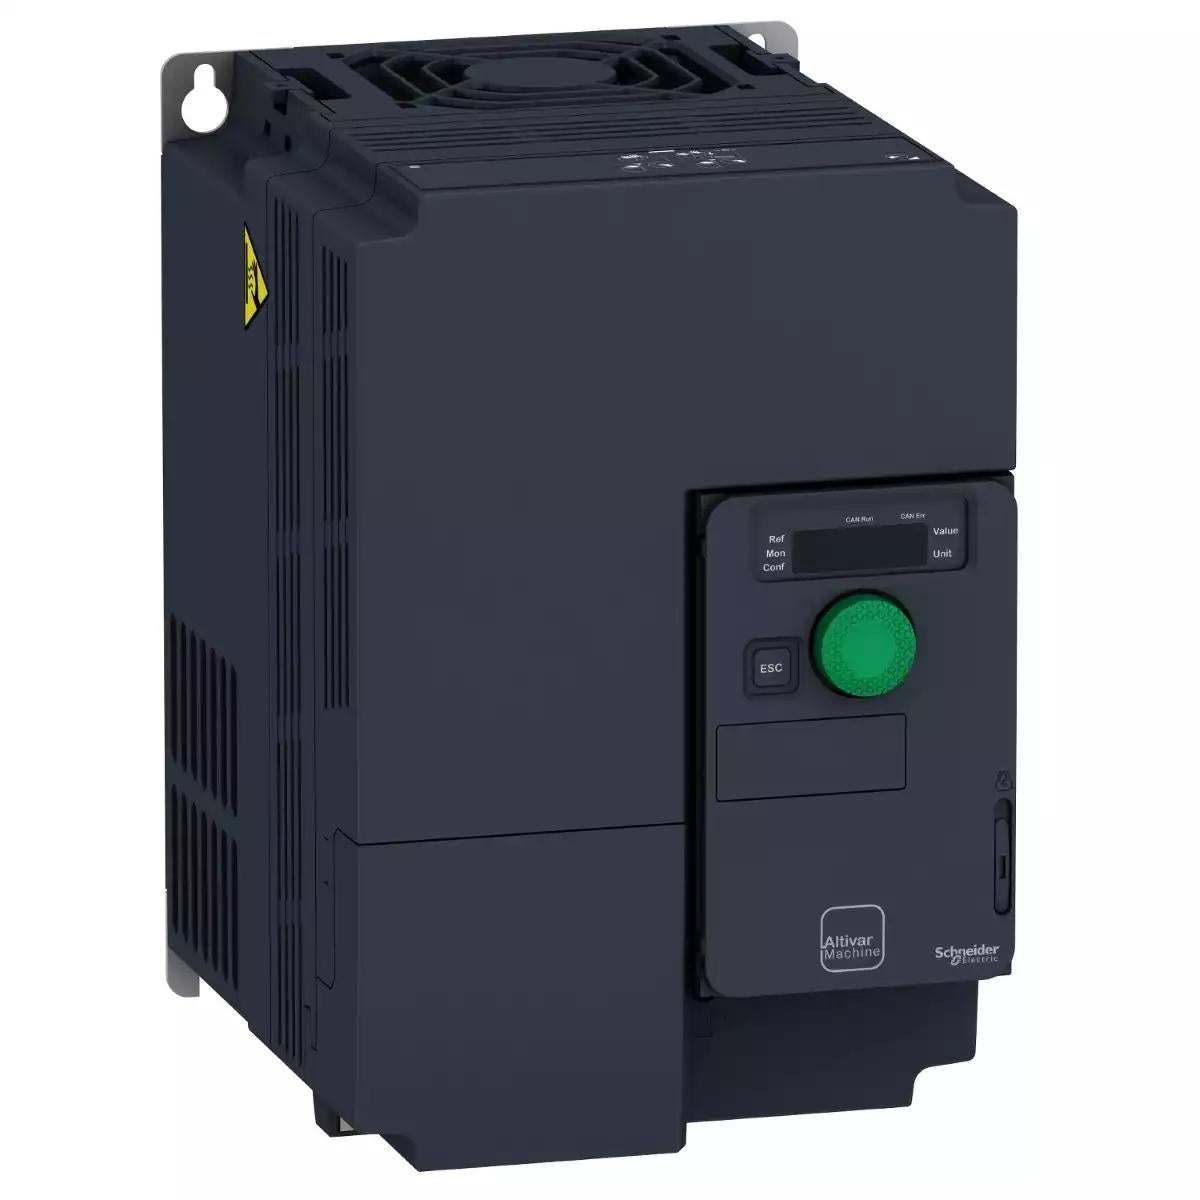 Schneider Electric Variable speed drive, Altivar Machine ATV320, 7.5 kW, 380...500 V, 3 phases, compact